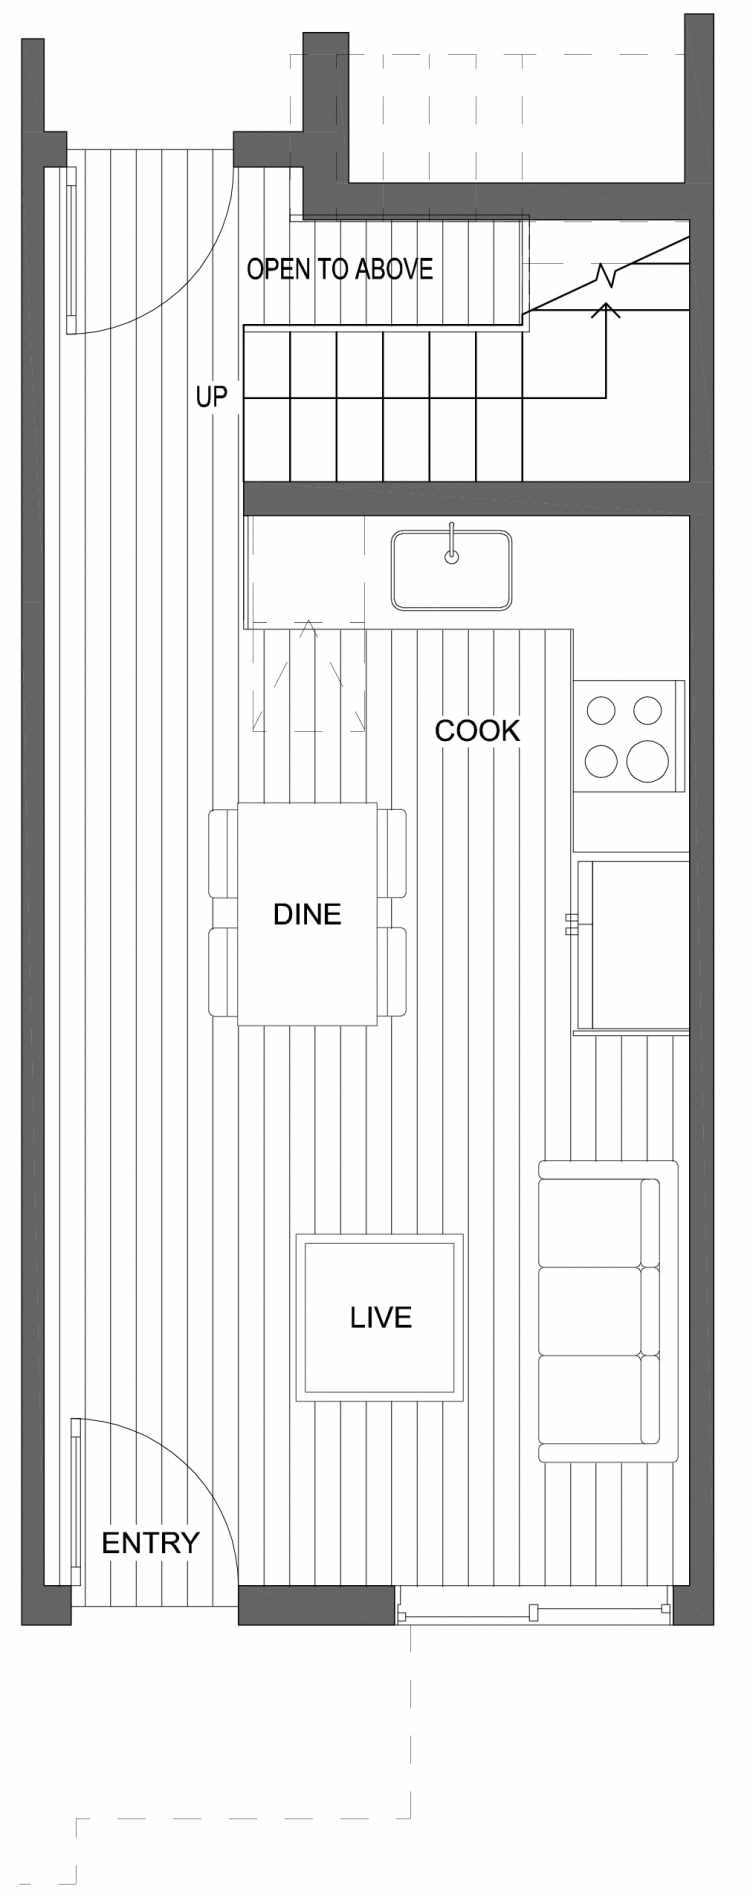 First Floor Plan of 10429E Alderbrook Pl NW, One of the Jasmine Townhomes in the Greenwood Neighborhood of Seattle